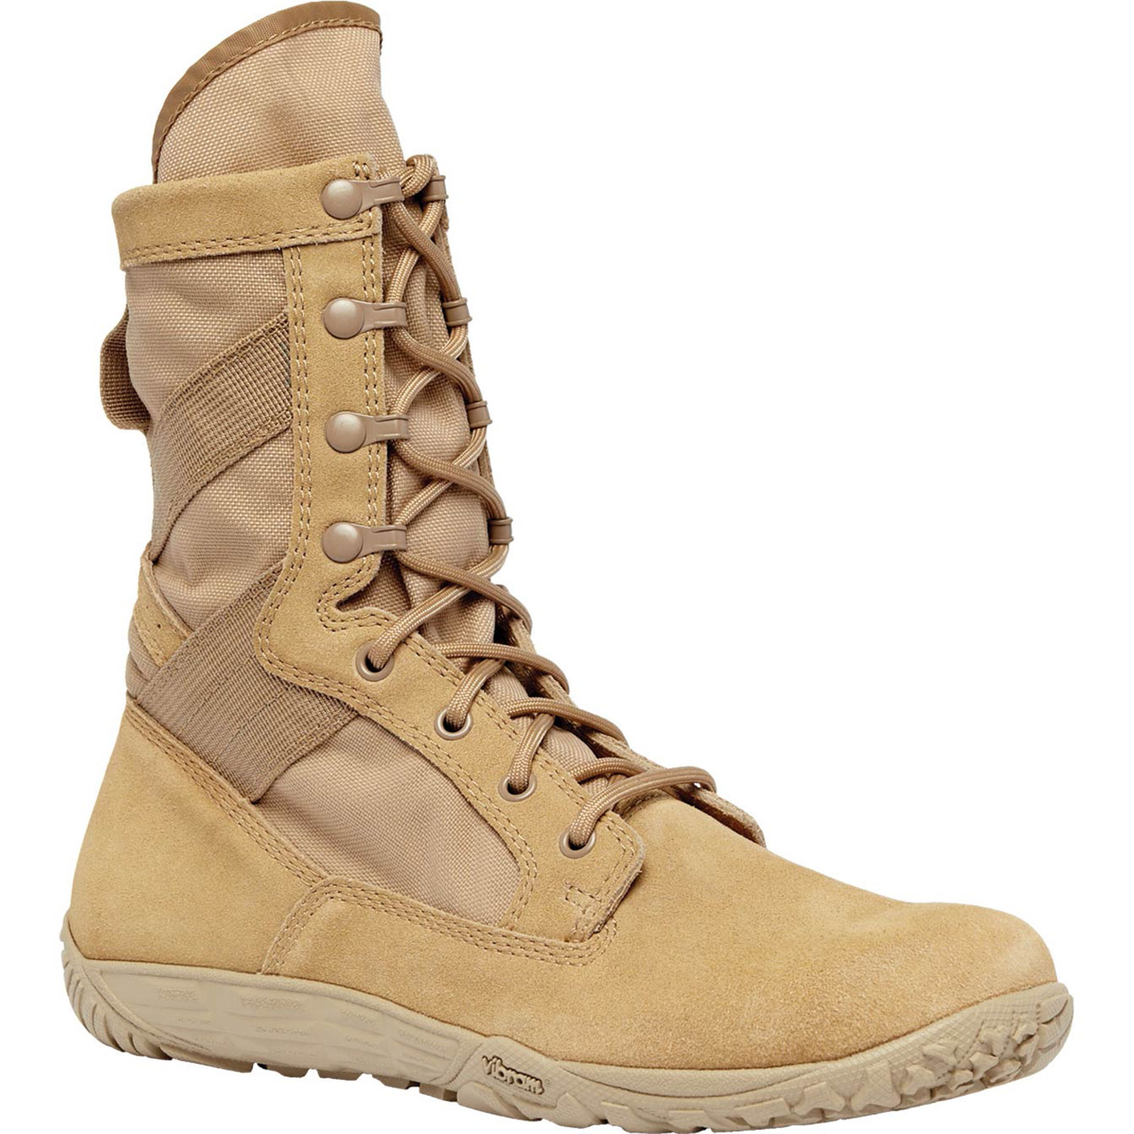 Tactical Research By Belleville Minimalist Tr101 Boot | Boots ...